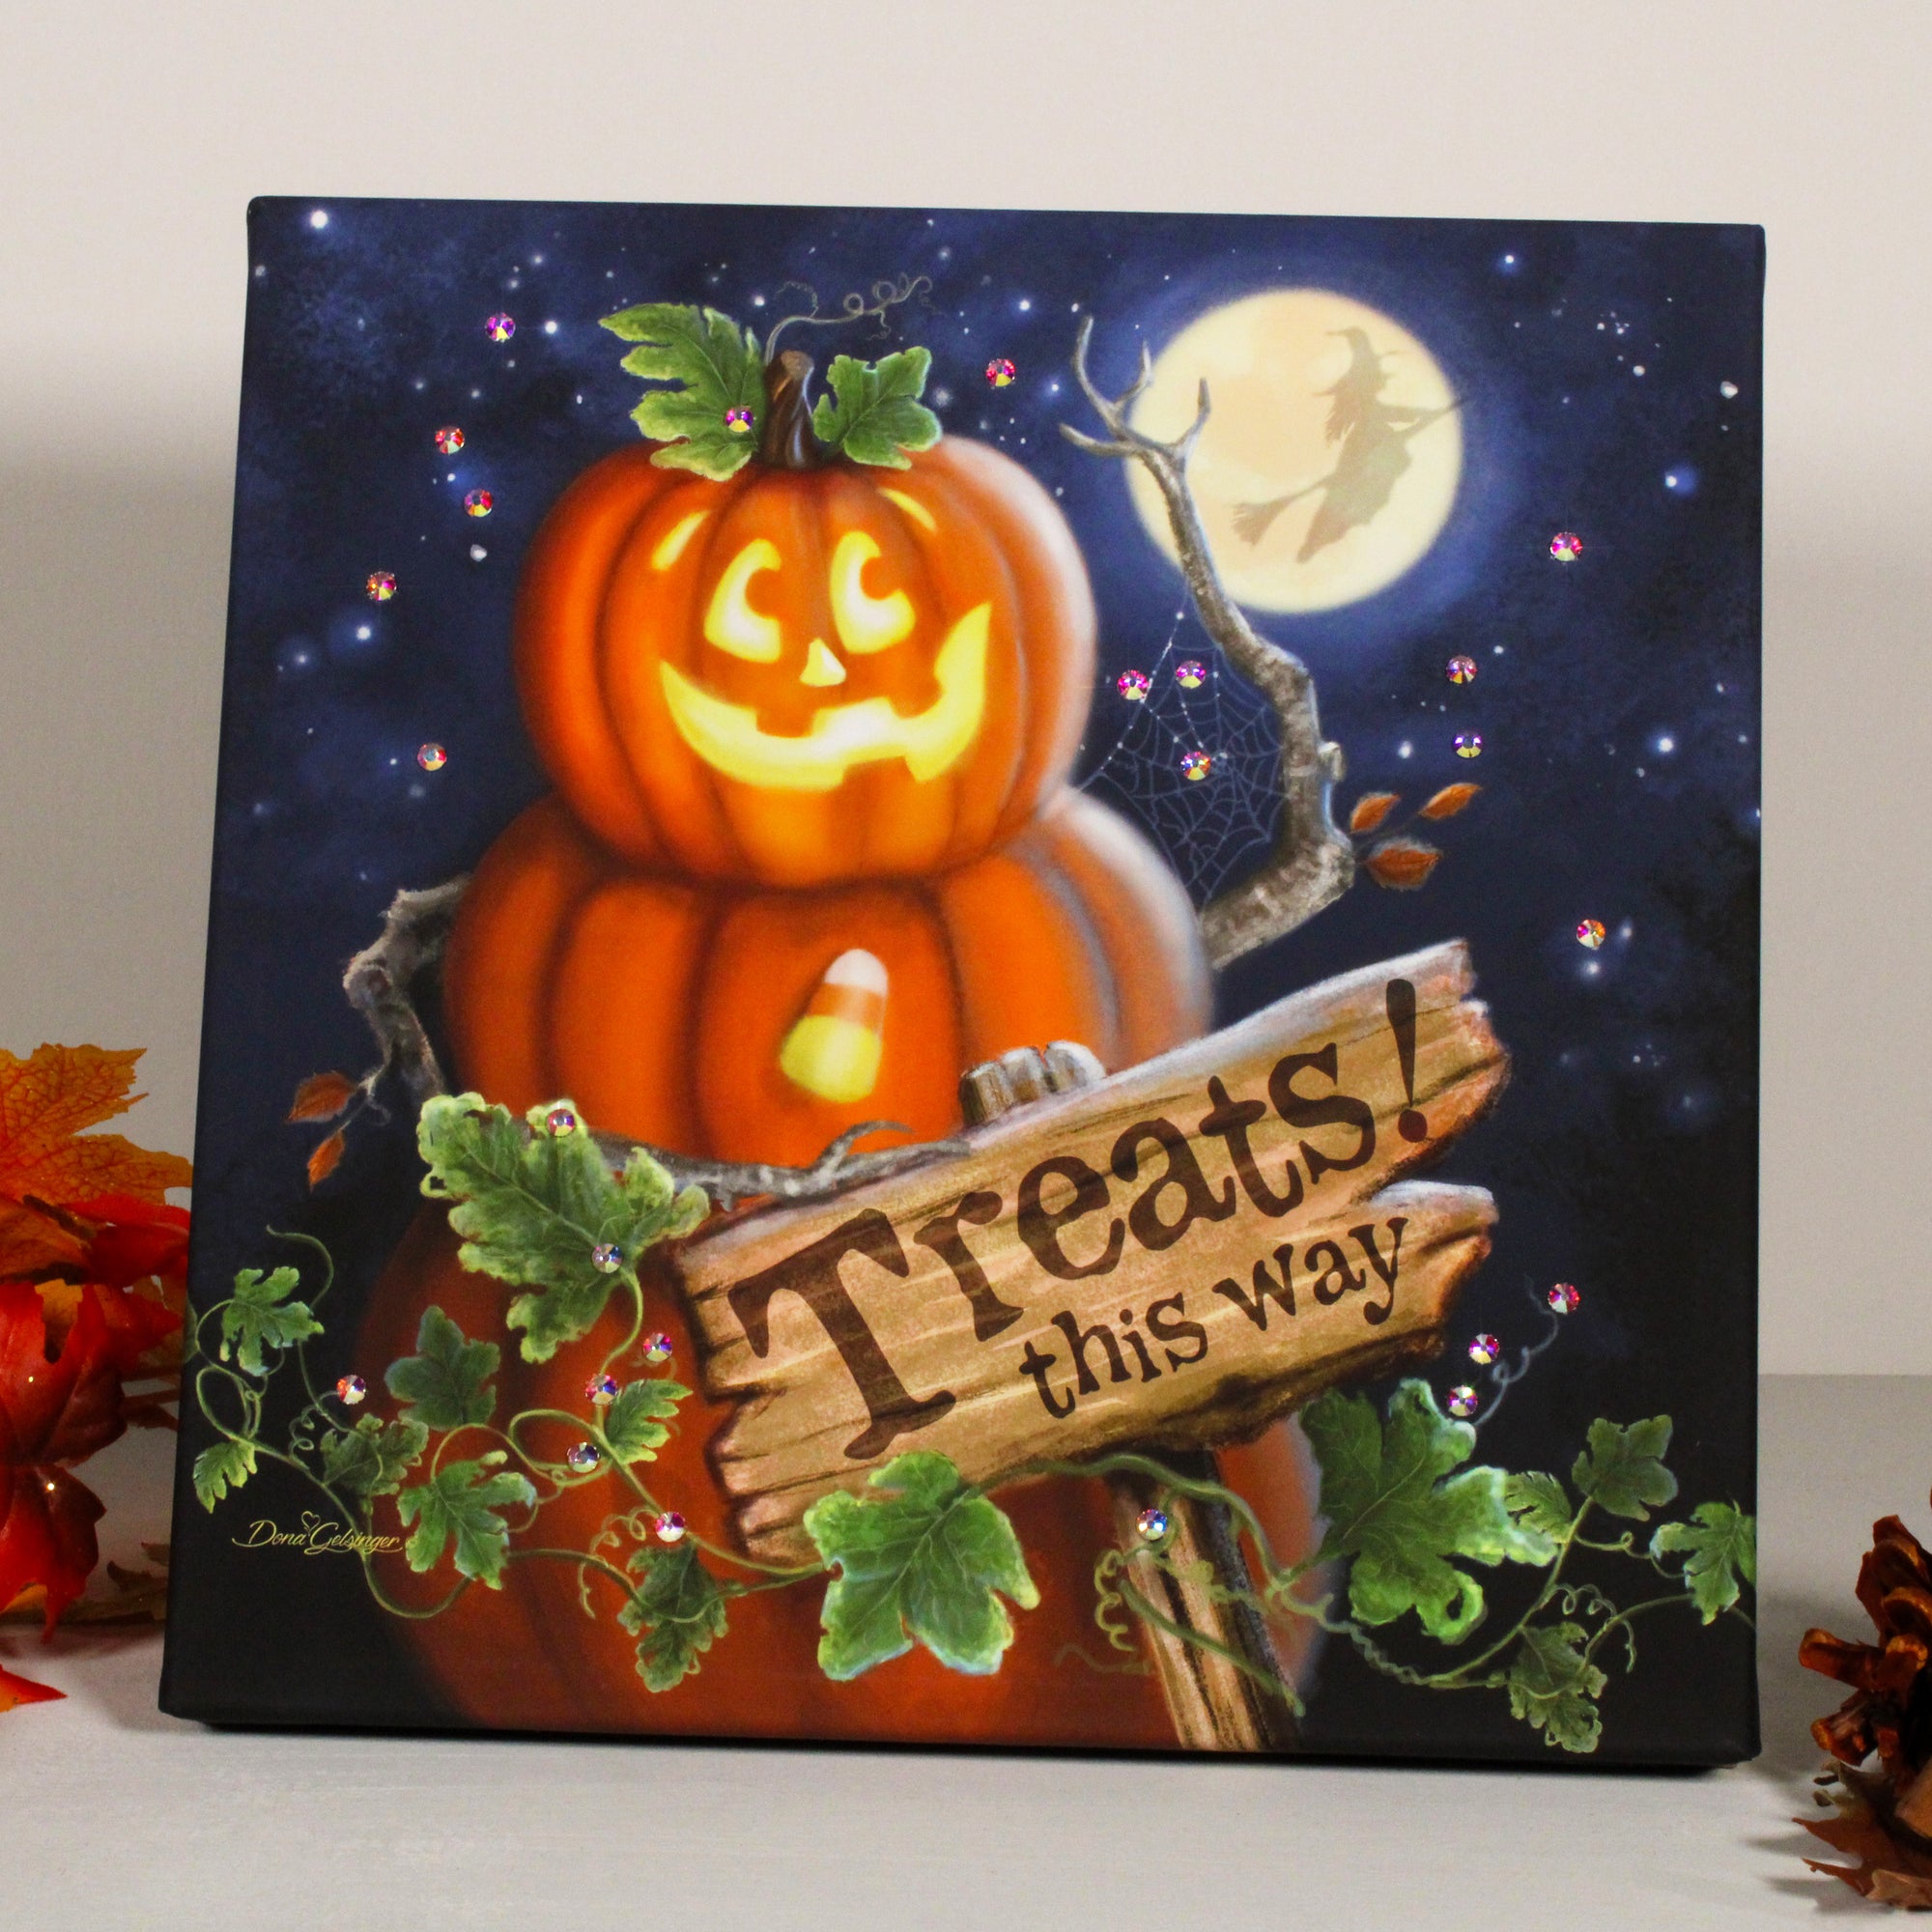 This delightful print features a whimsical jack-o-lantern perched on top of two plump pumpkins, creating a playful snowman-like figure that is sure to bring a smile to your face.  Guiding your way to the sweetest treats is a charming sign that reads "treats this way," adding a touch of magic to this already delightful scene. The backdrop of a full moon casts a romantic glow, while the silhouette of a witch flying on her broomstick across the moon.